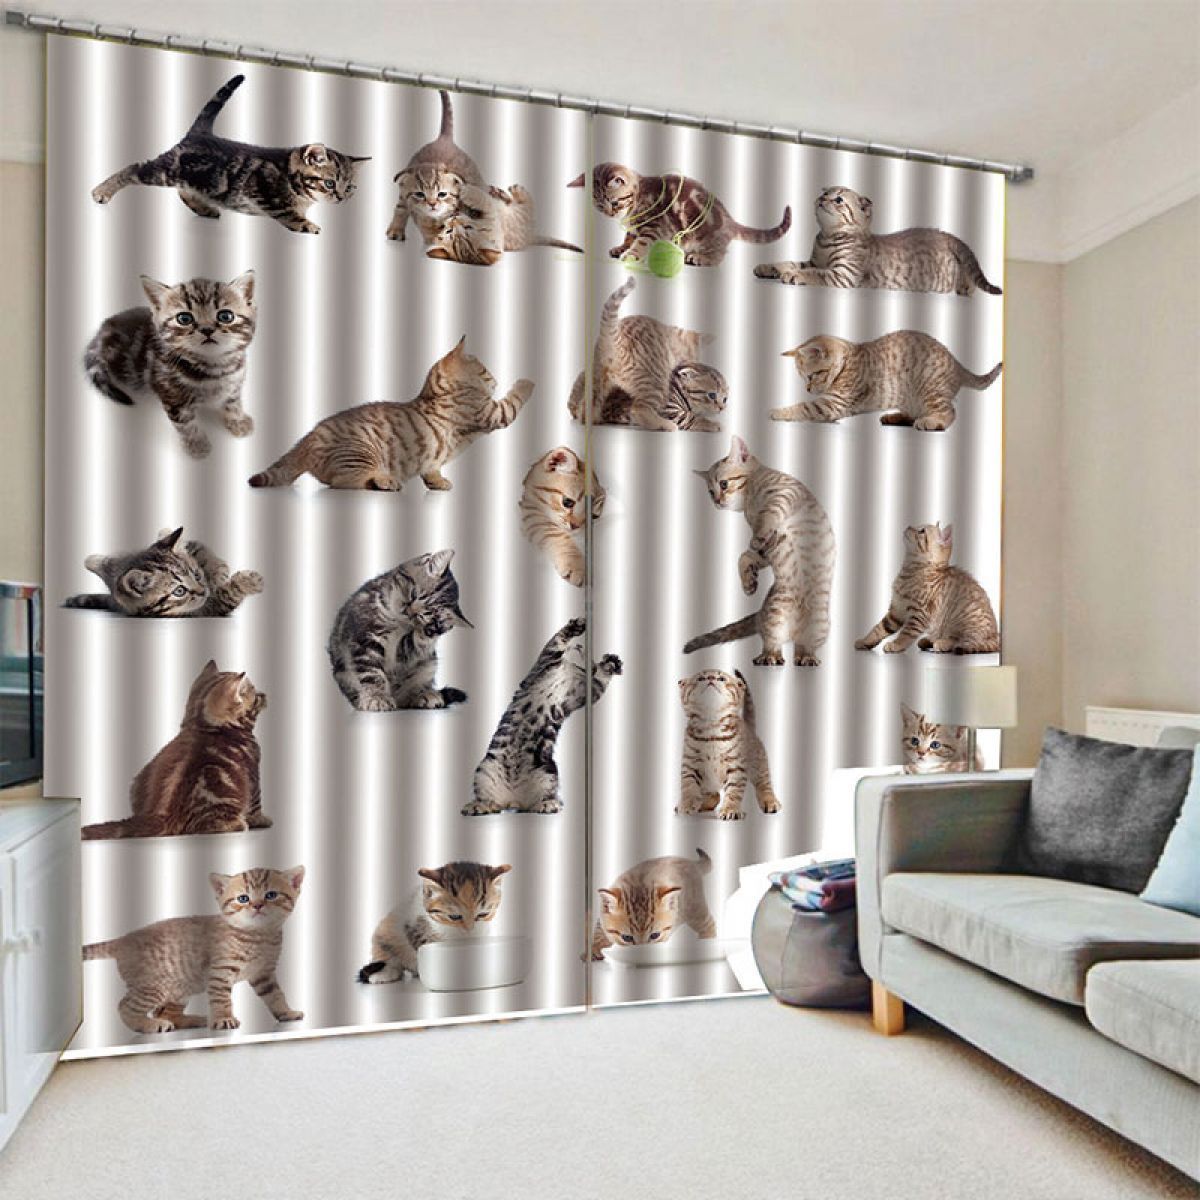 3d cat hanging printed window curtain home decor 2478